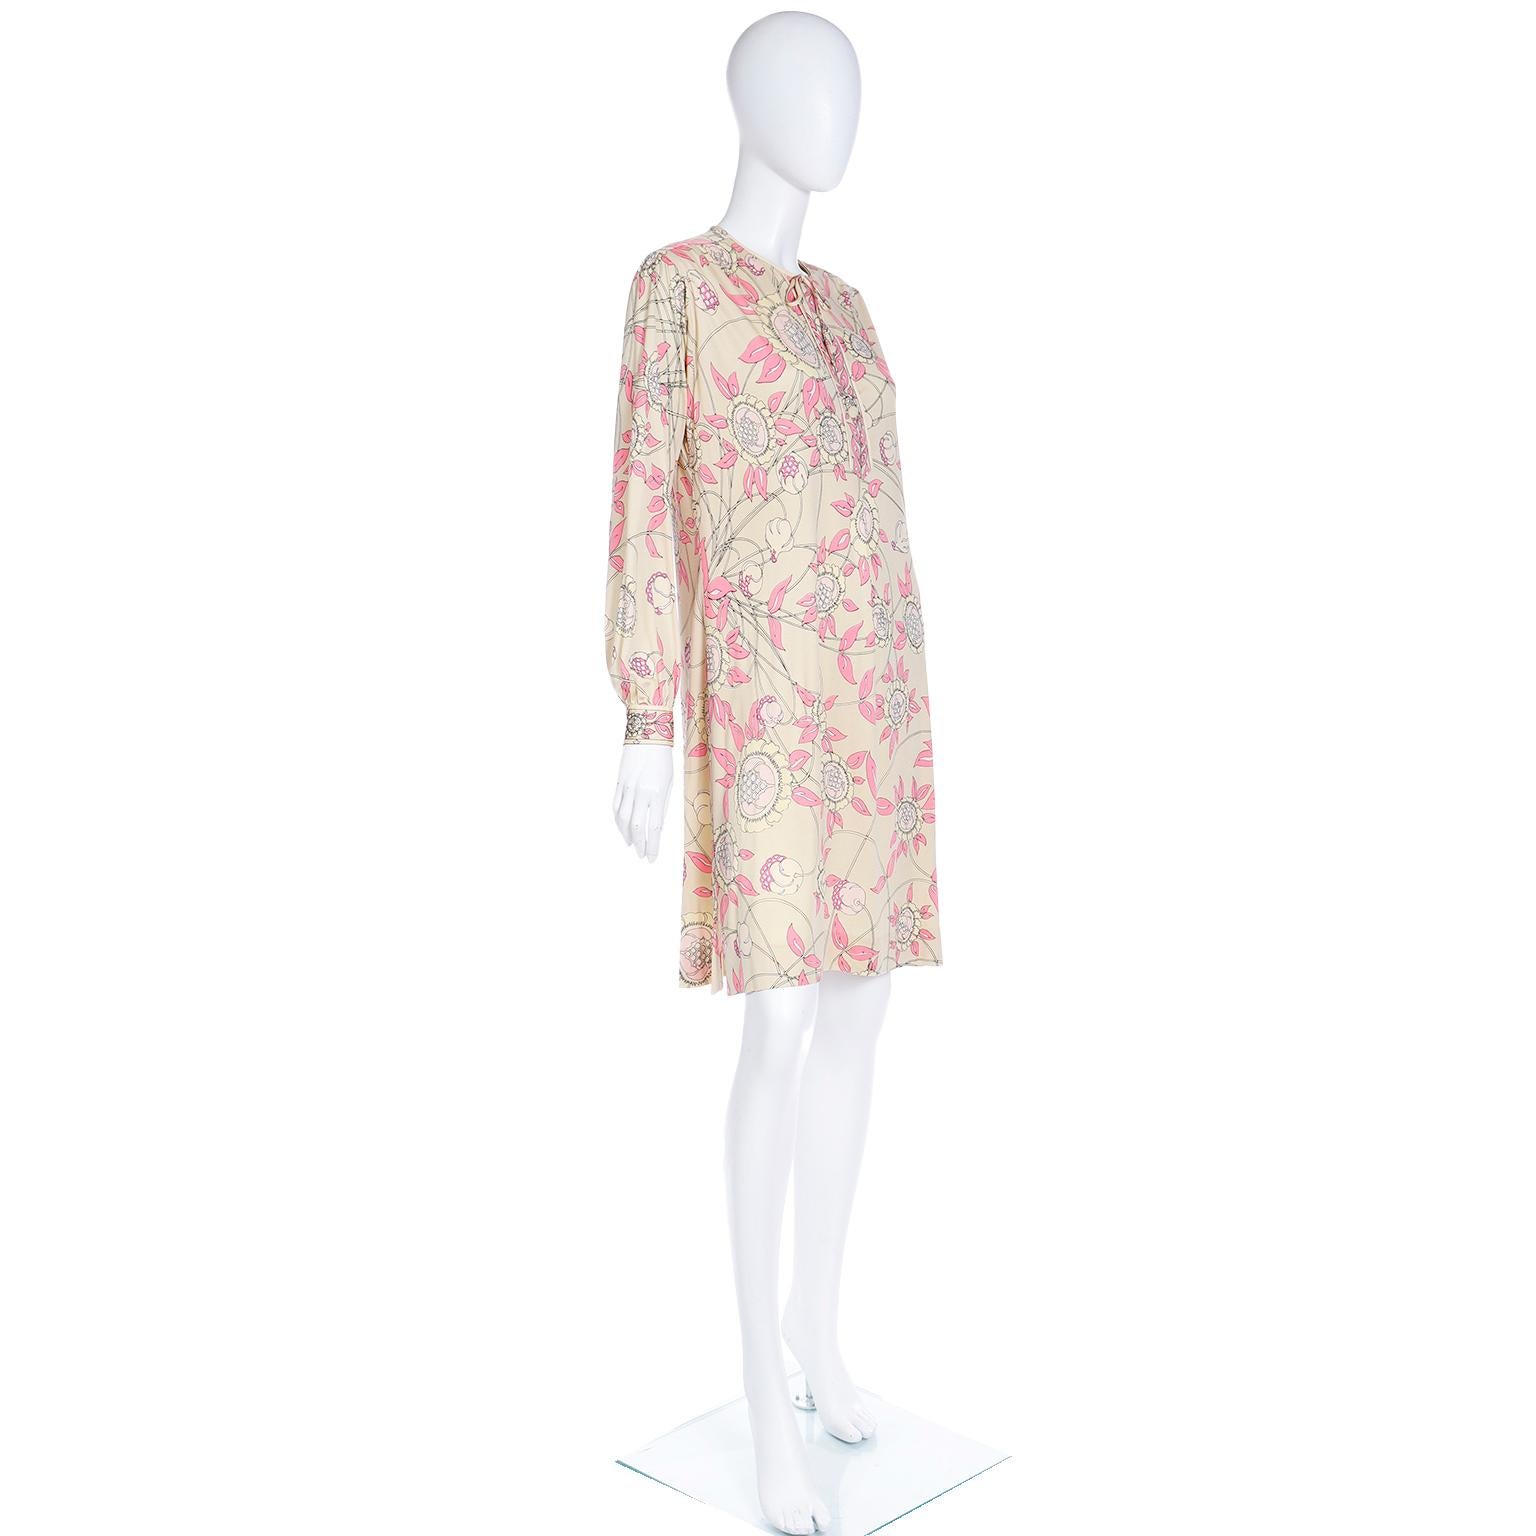 1970s Vintage Emilio Pucci Silk Jersey Pale Yellow & Pink Floral Dress In Excellent Condition For Sale In Portland, OR